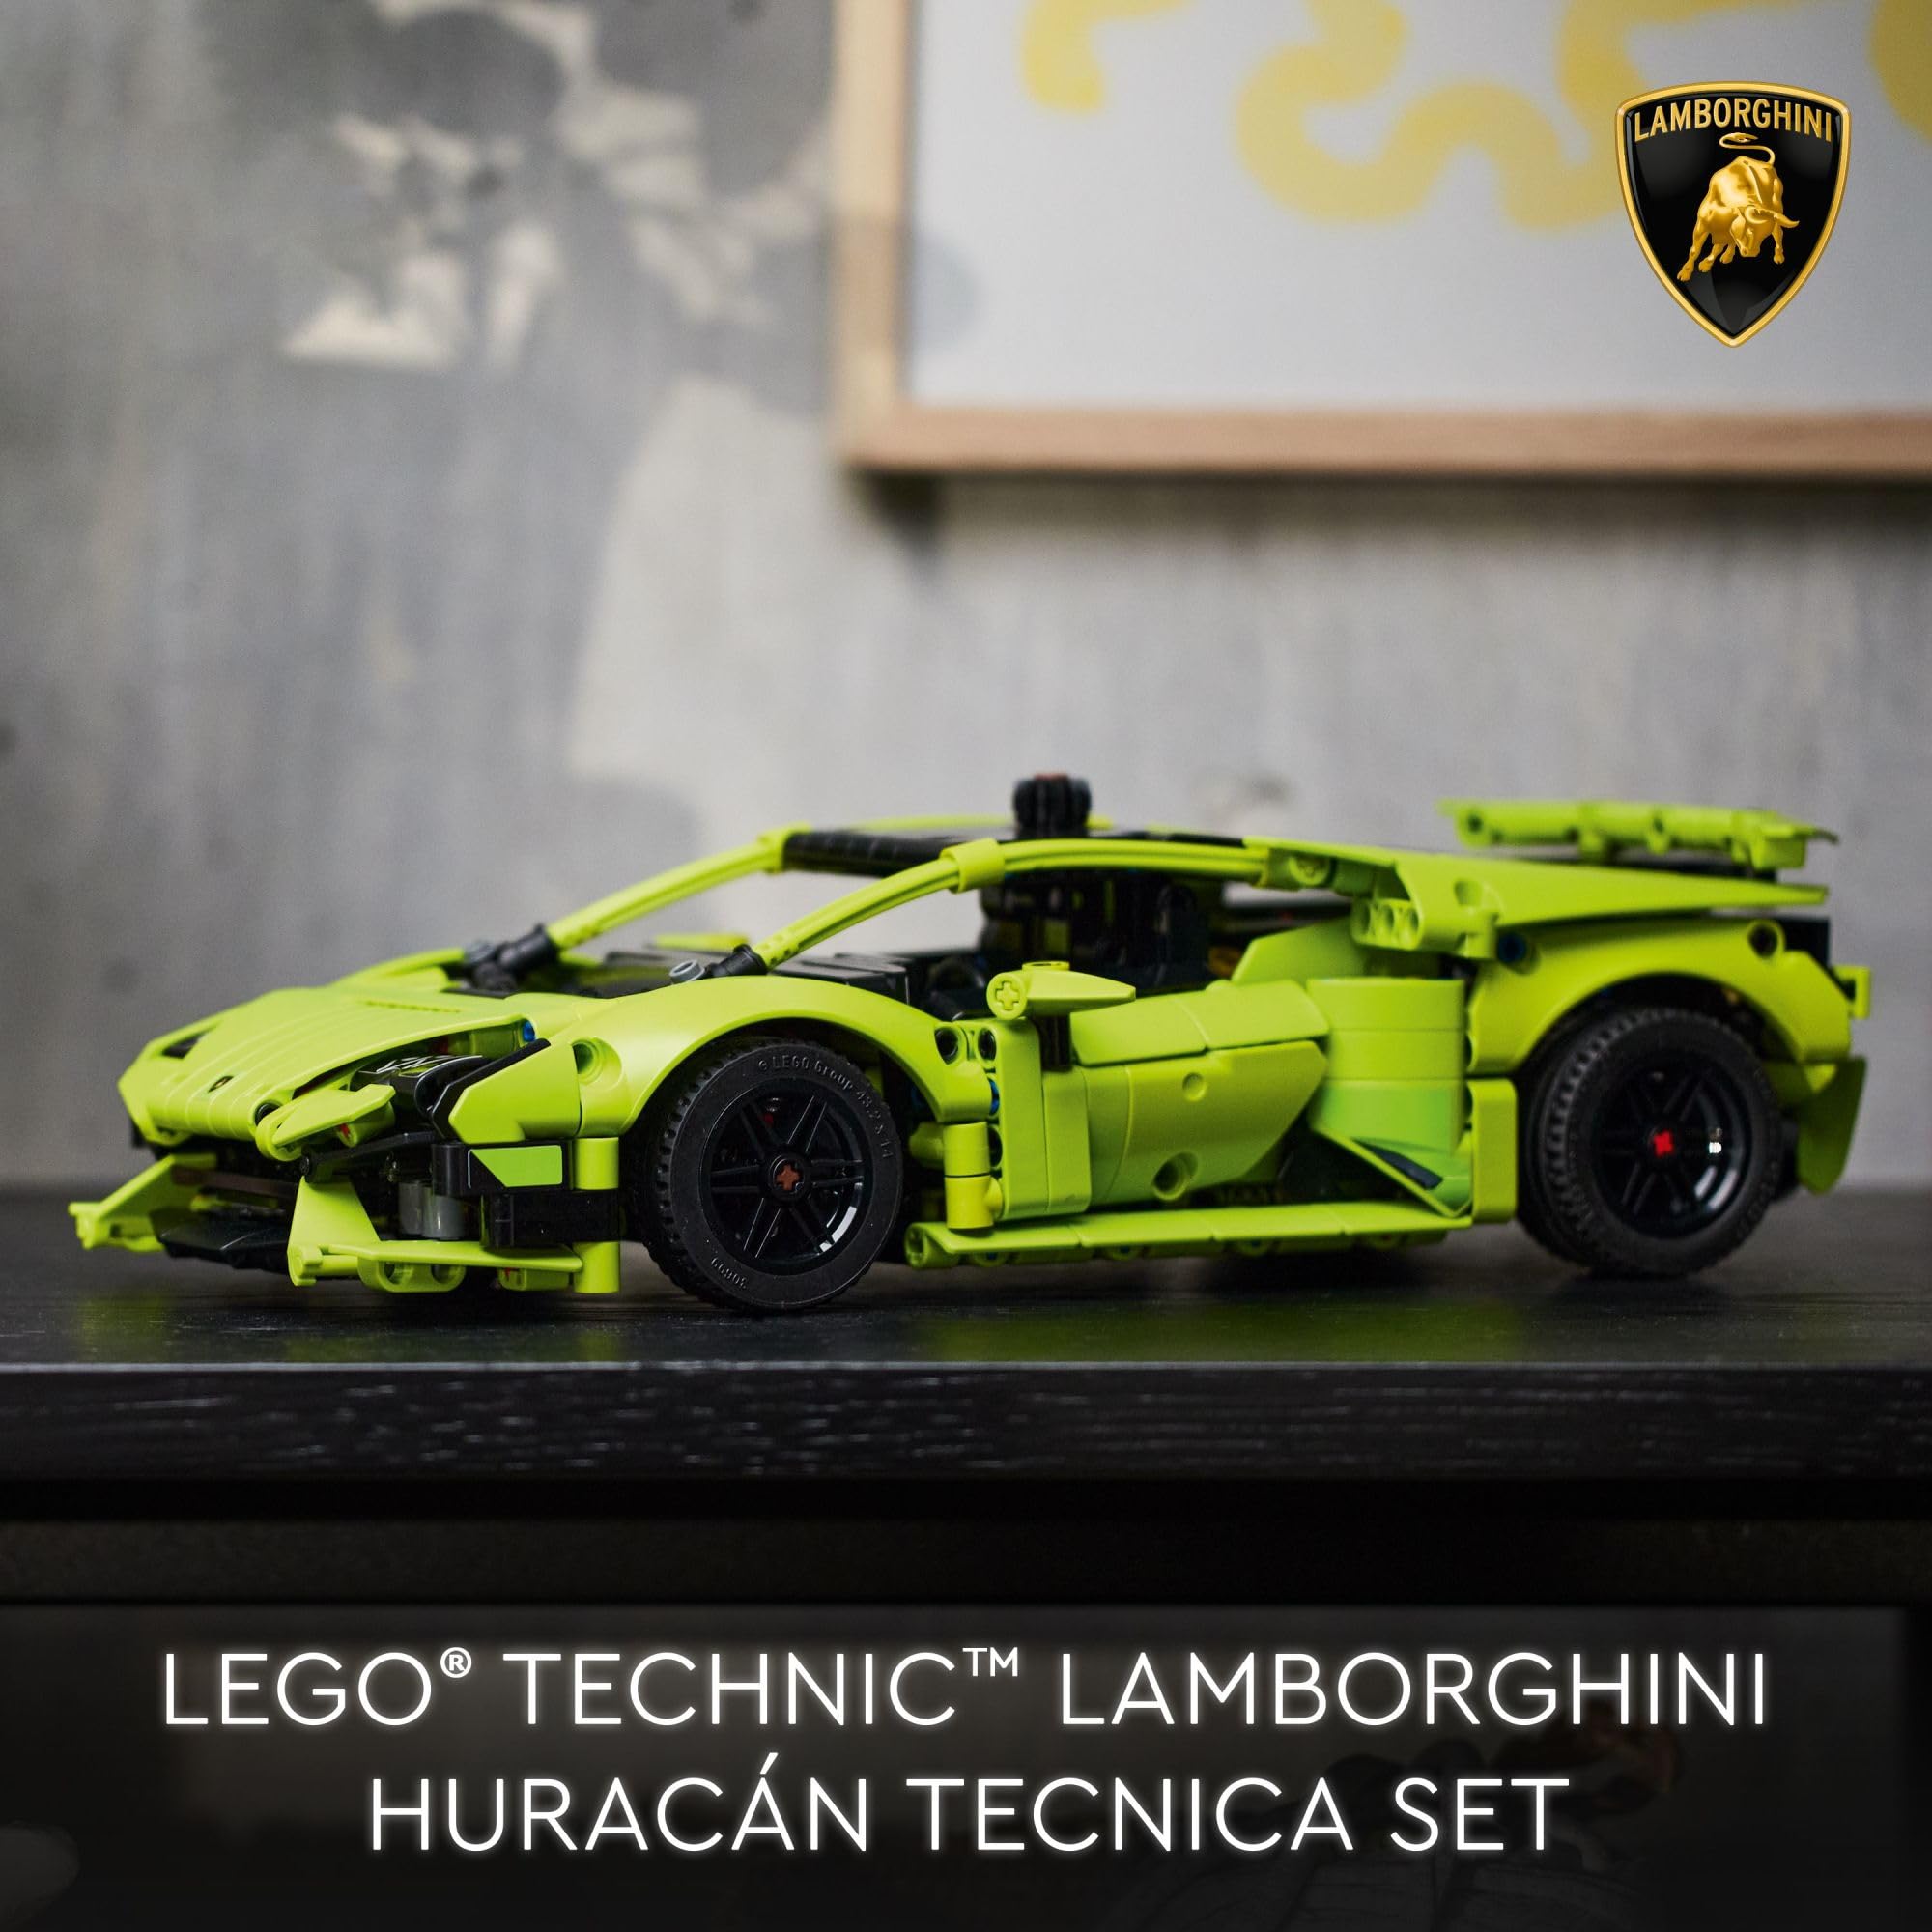 LEGO Technic Lamborghini Huracán Tecnica 42161 Advanced Sports Car Building Kit for Kids Ages 9 and up Who Love Engineering and Collecting Exotic Sports Car Toys